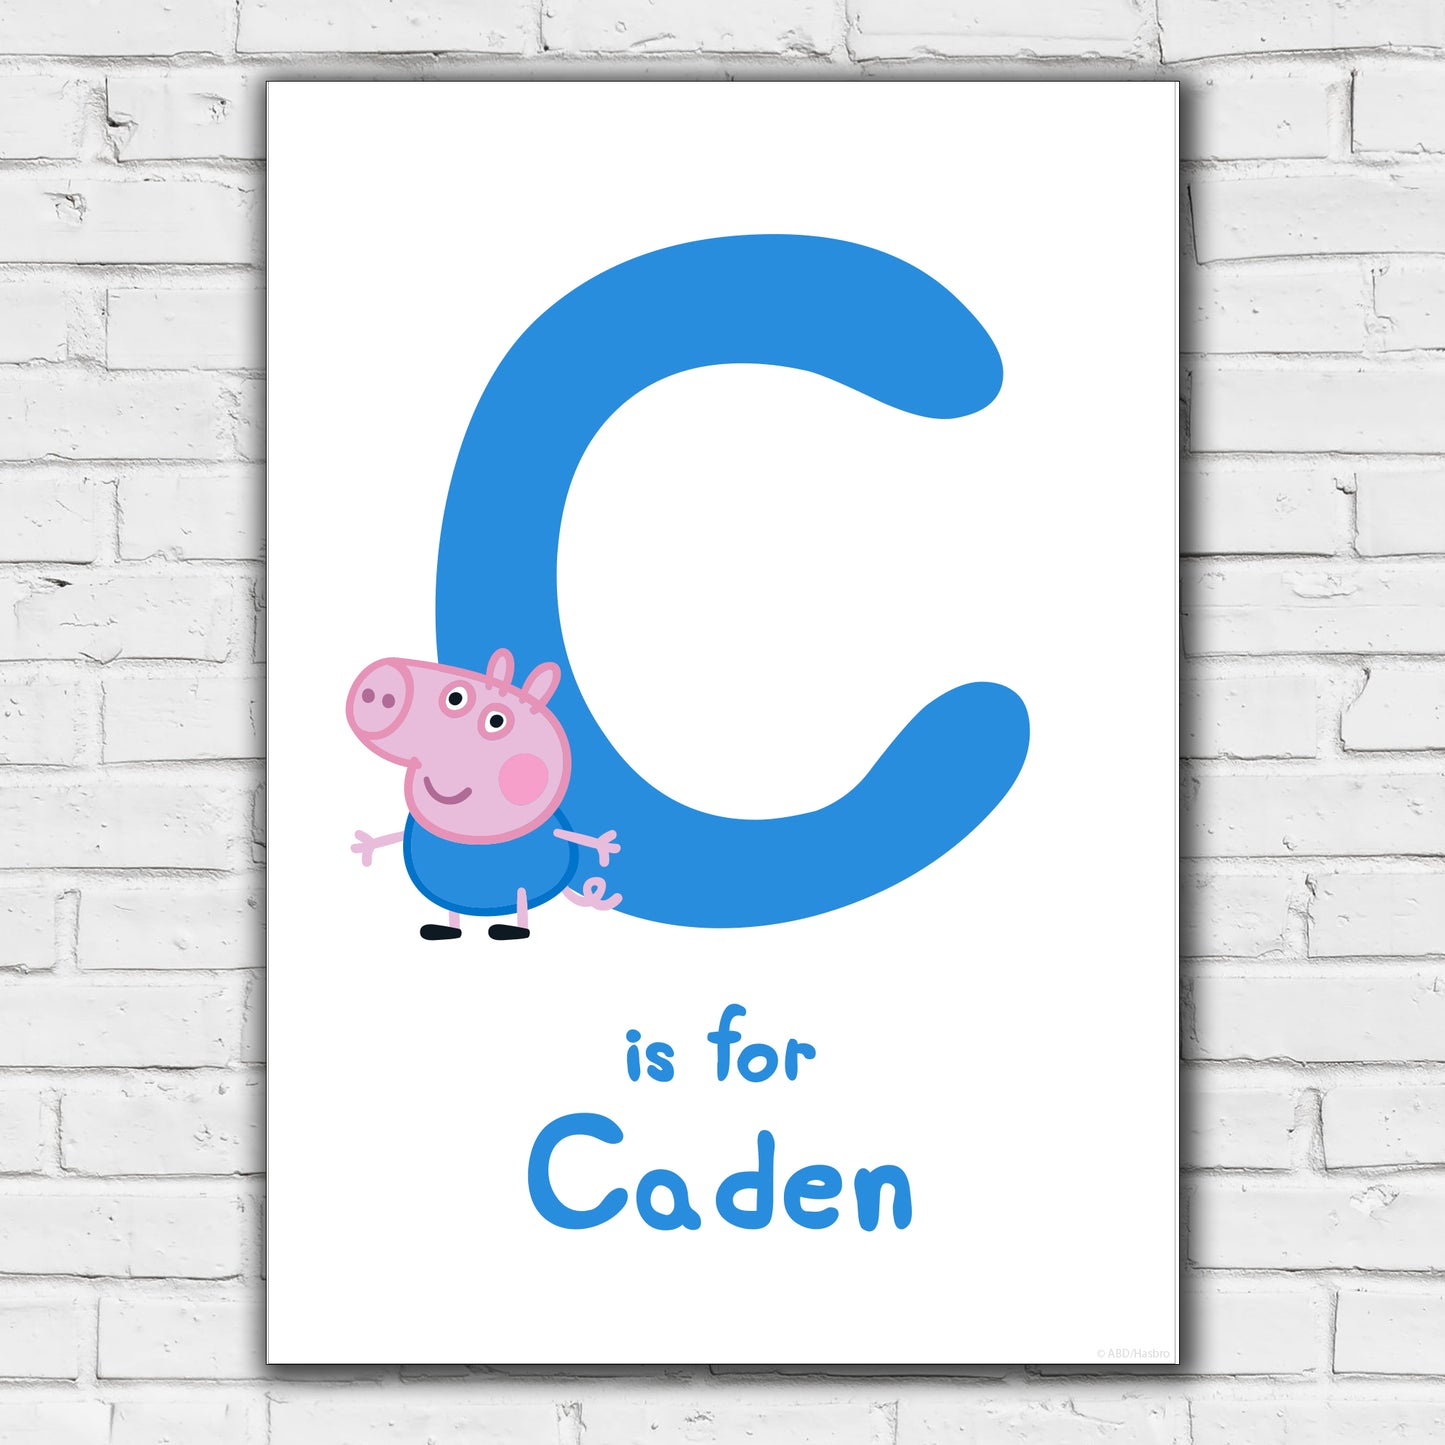 Peppa Pig Print - George Letter and Personalised Name Blue Poster Wall Art